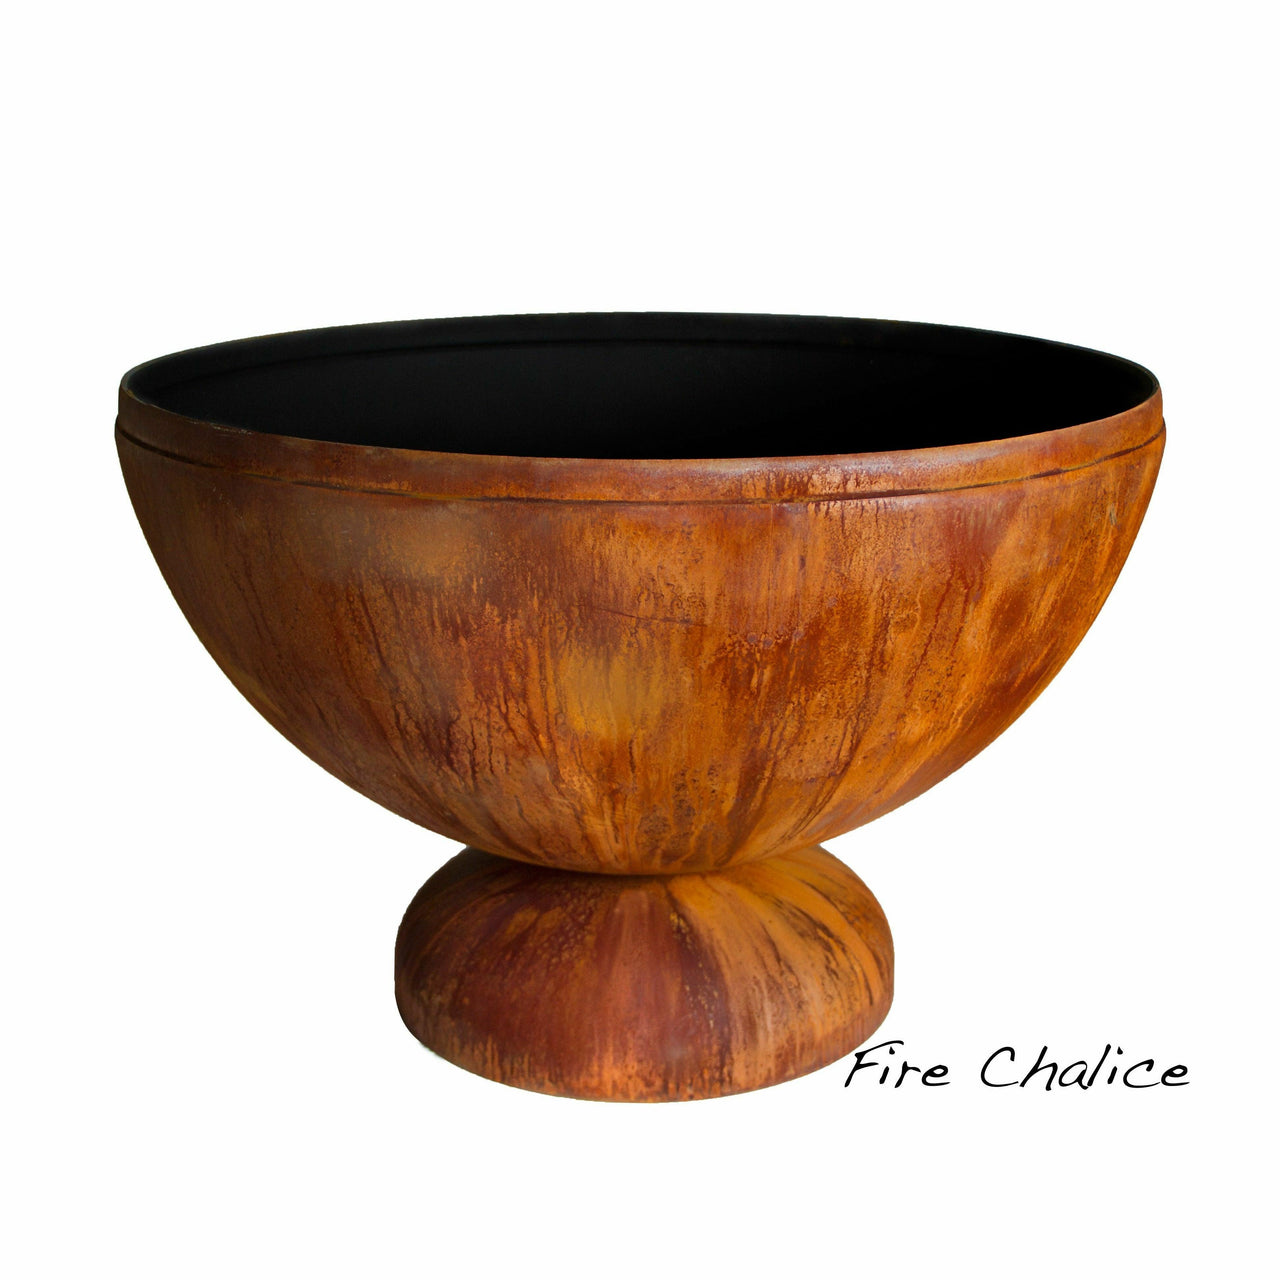 Ohio Flame Fire Chalice Artisan Fire Bowl - Fire Pit Stock